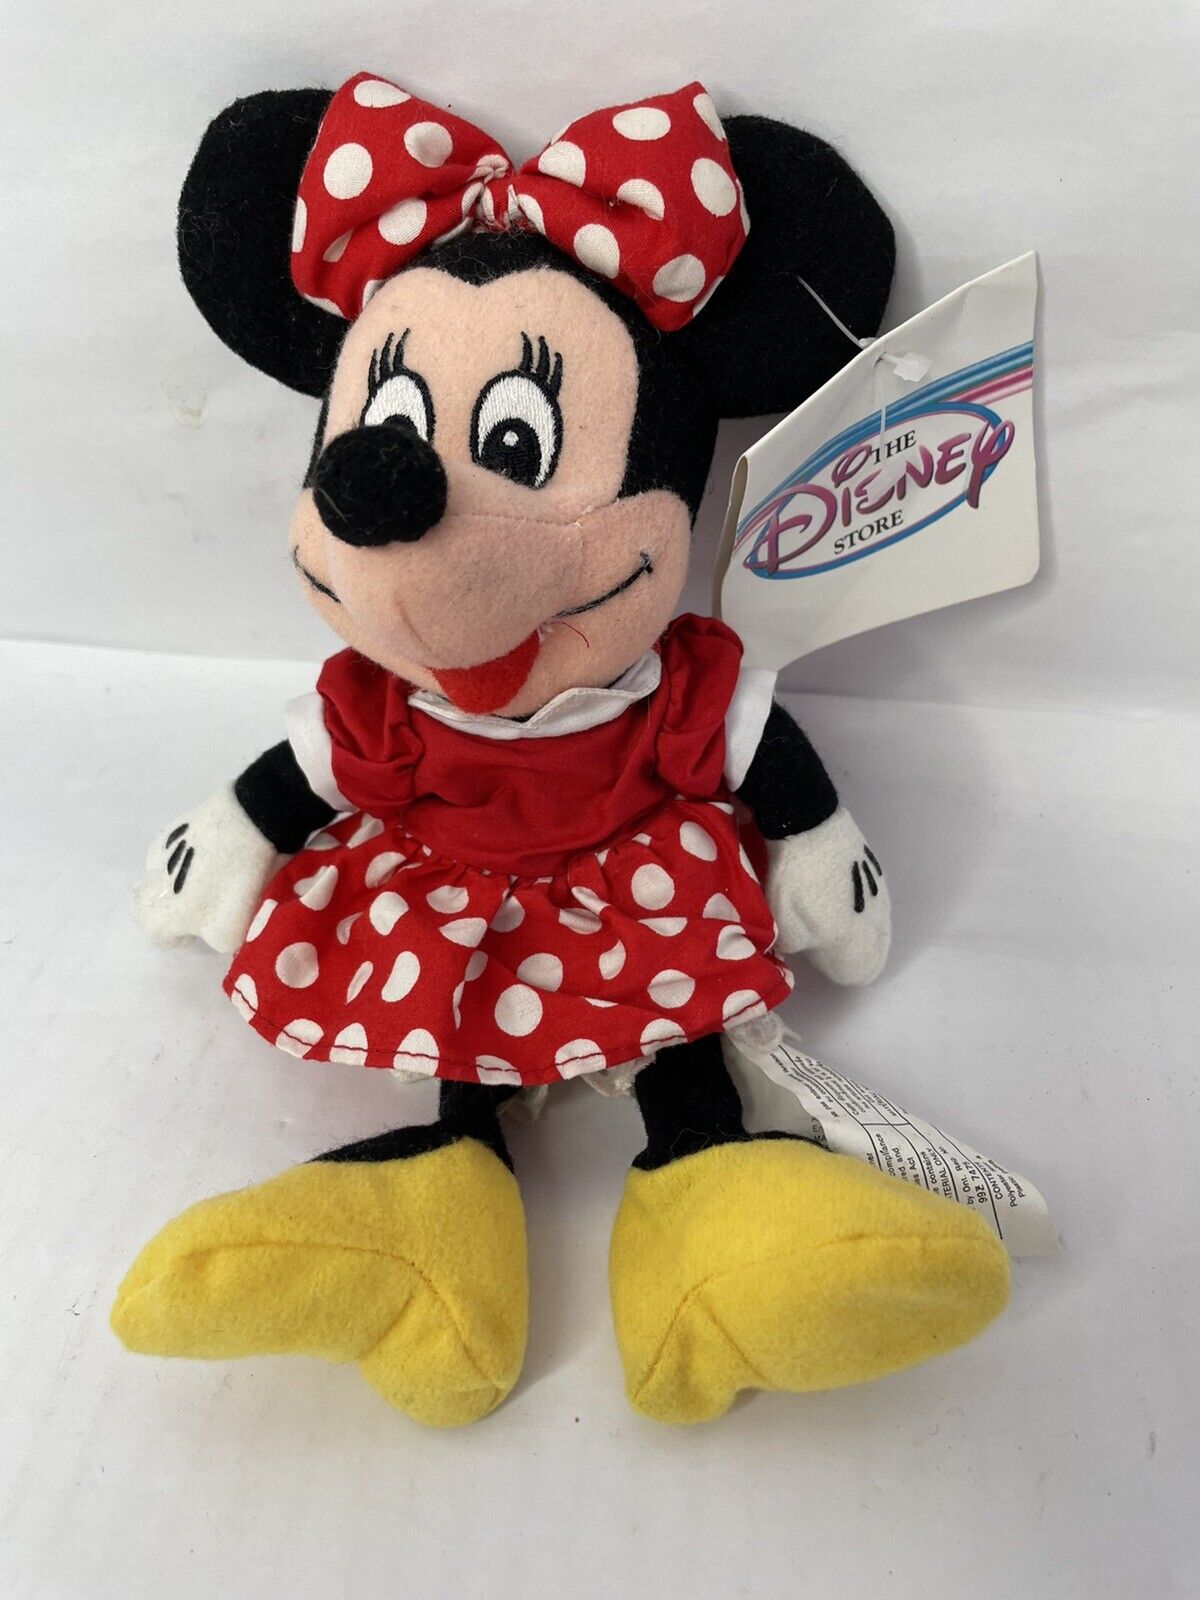 Disney Store Minnie Mouse Red Dress Mini Bean Bag Plush with Tags